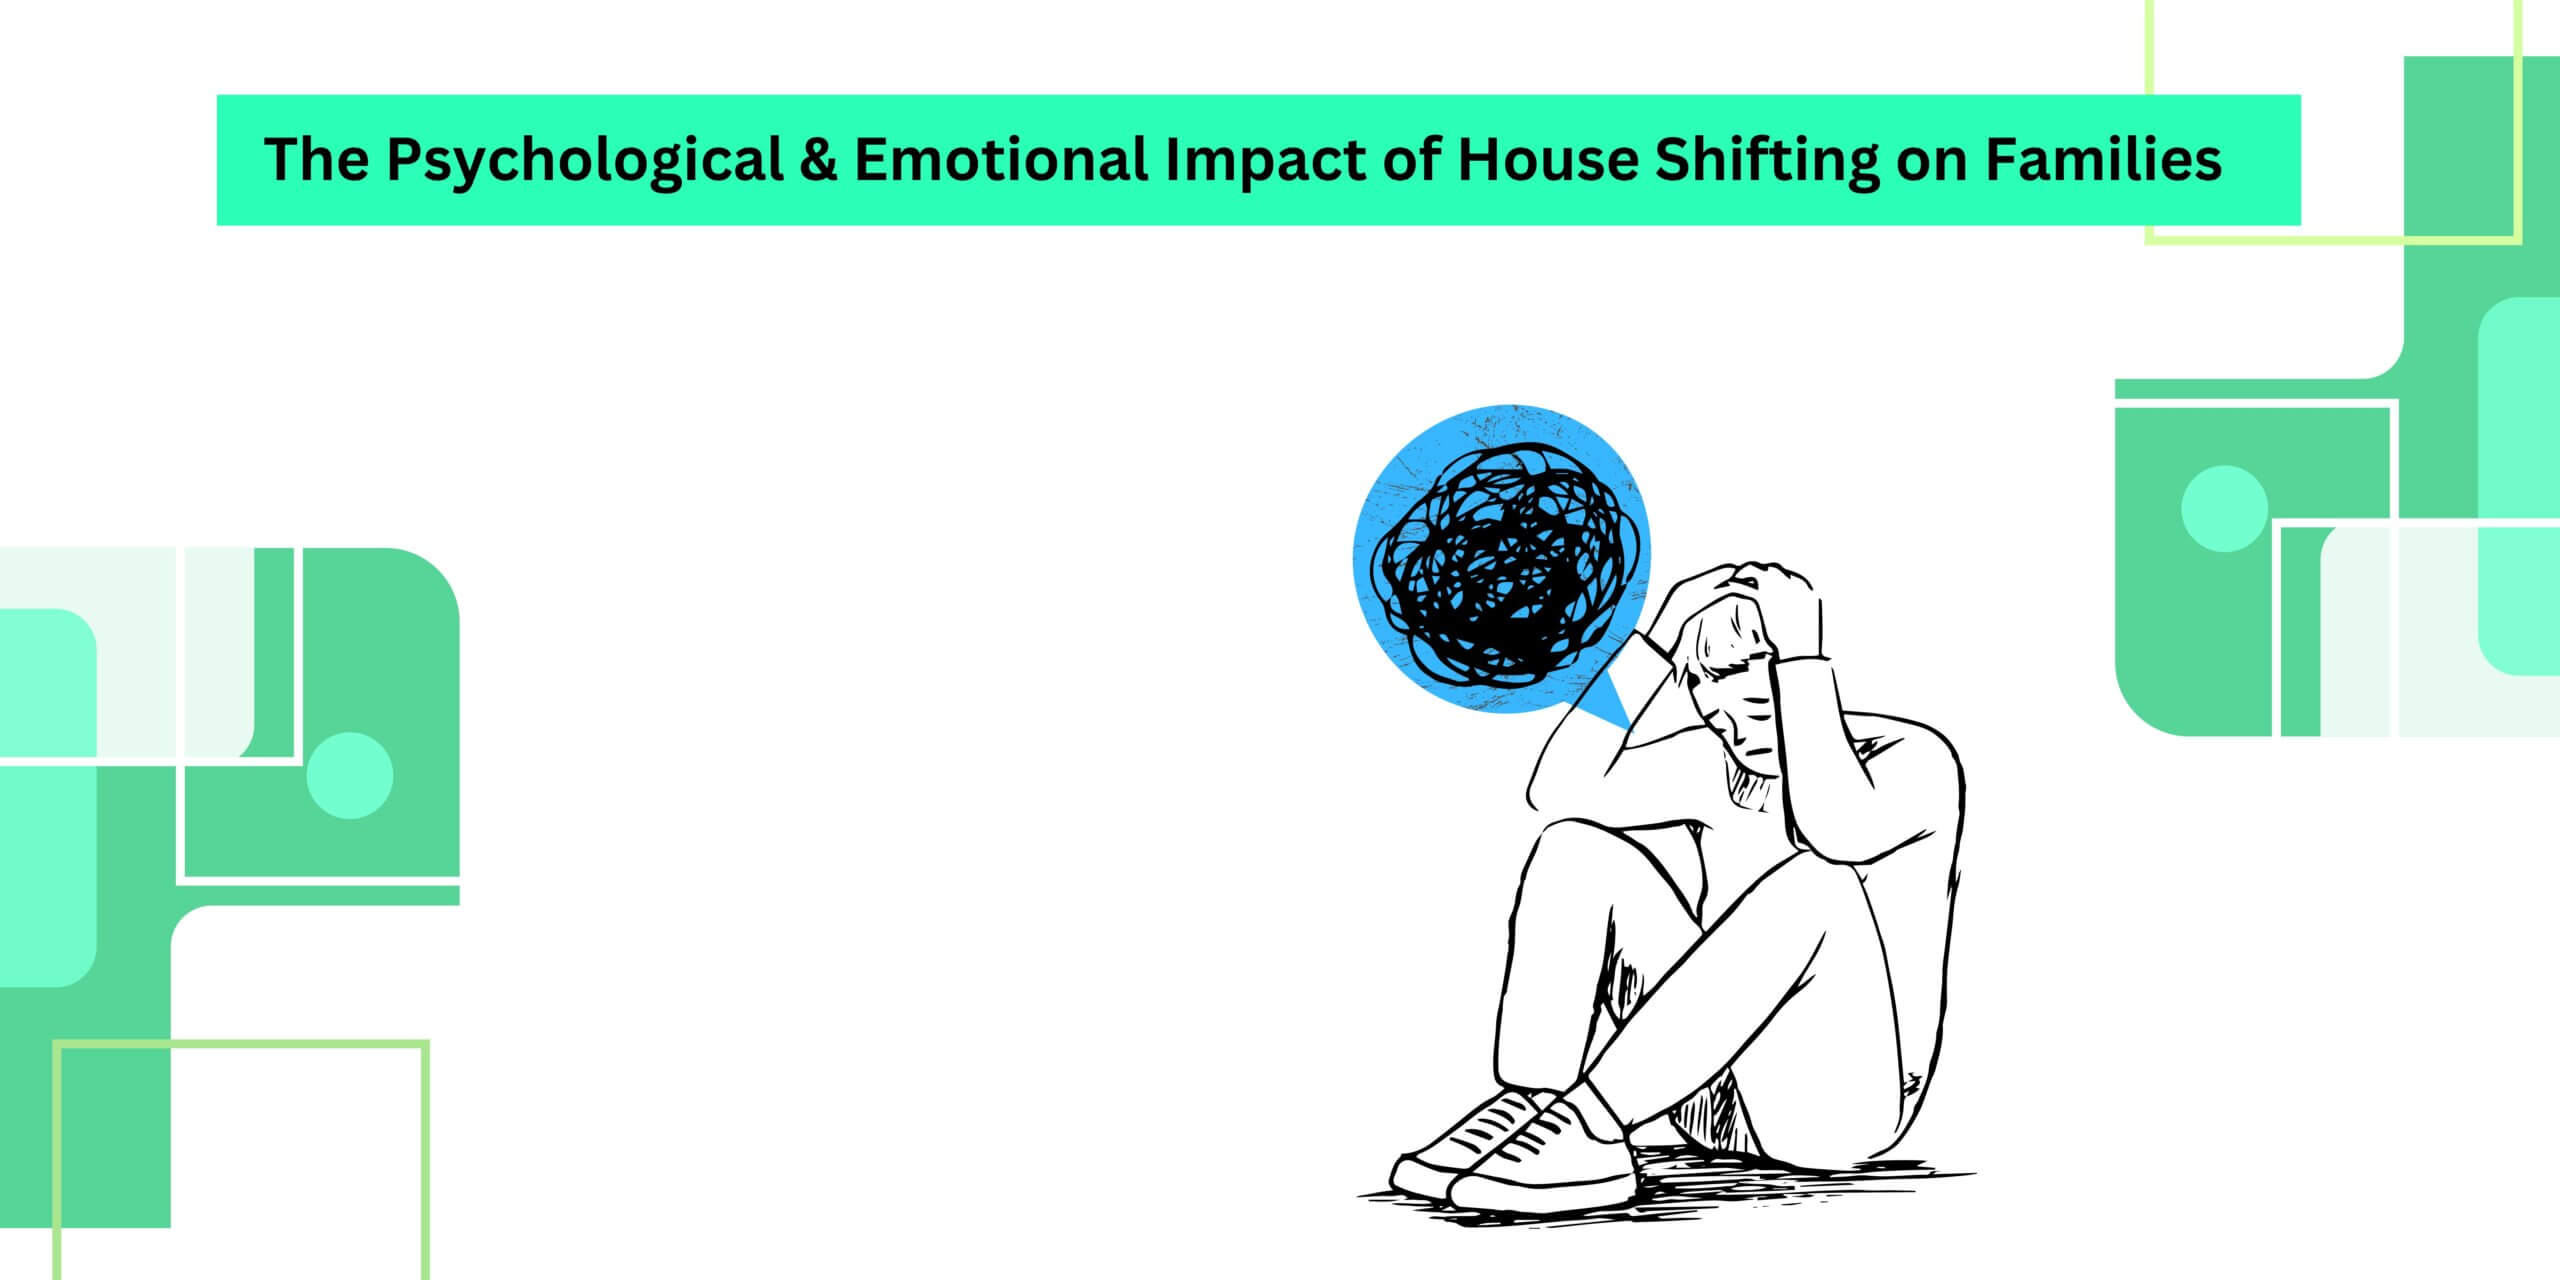 The Psychological & Emotional Impact of House Shifting on Families